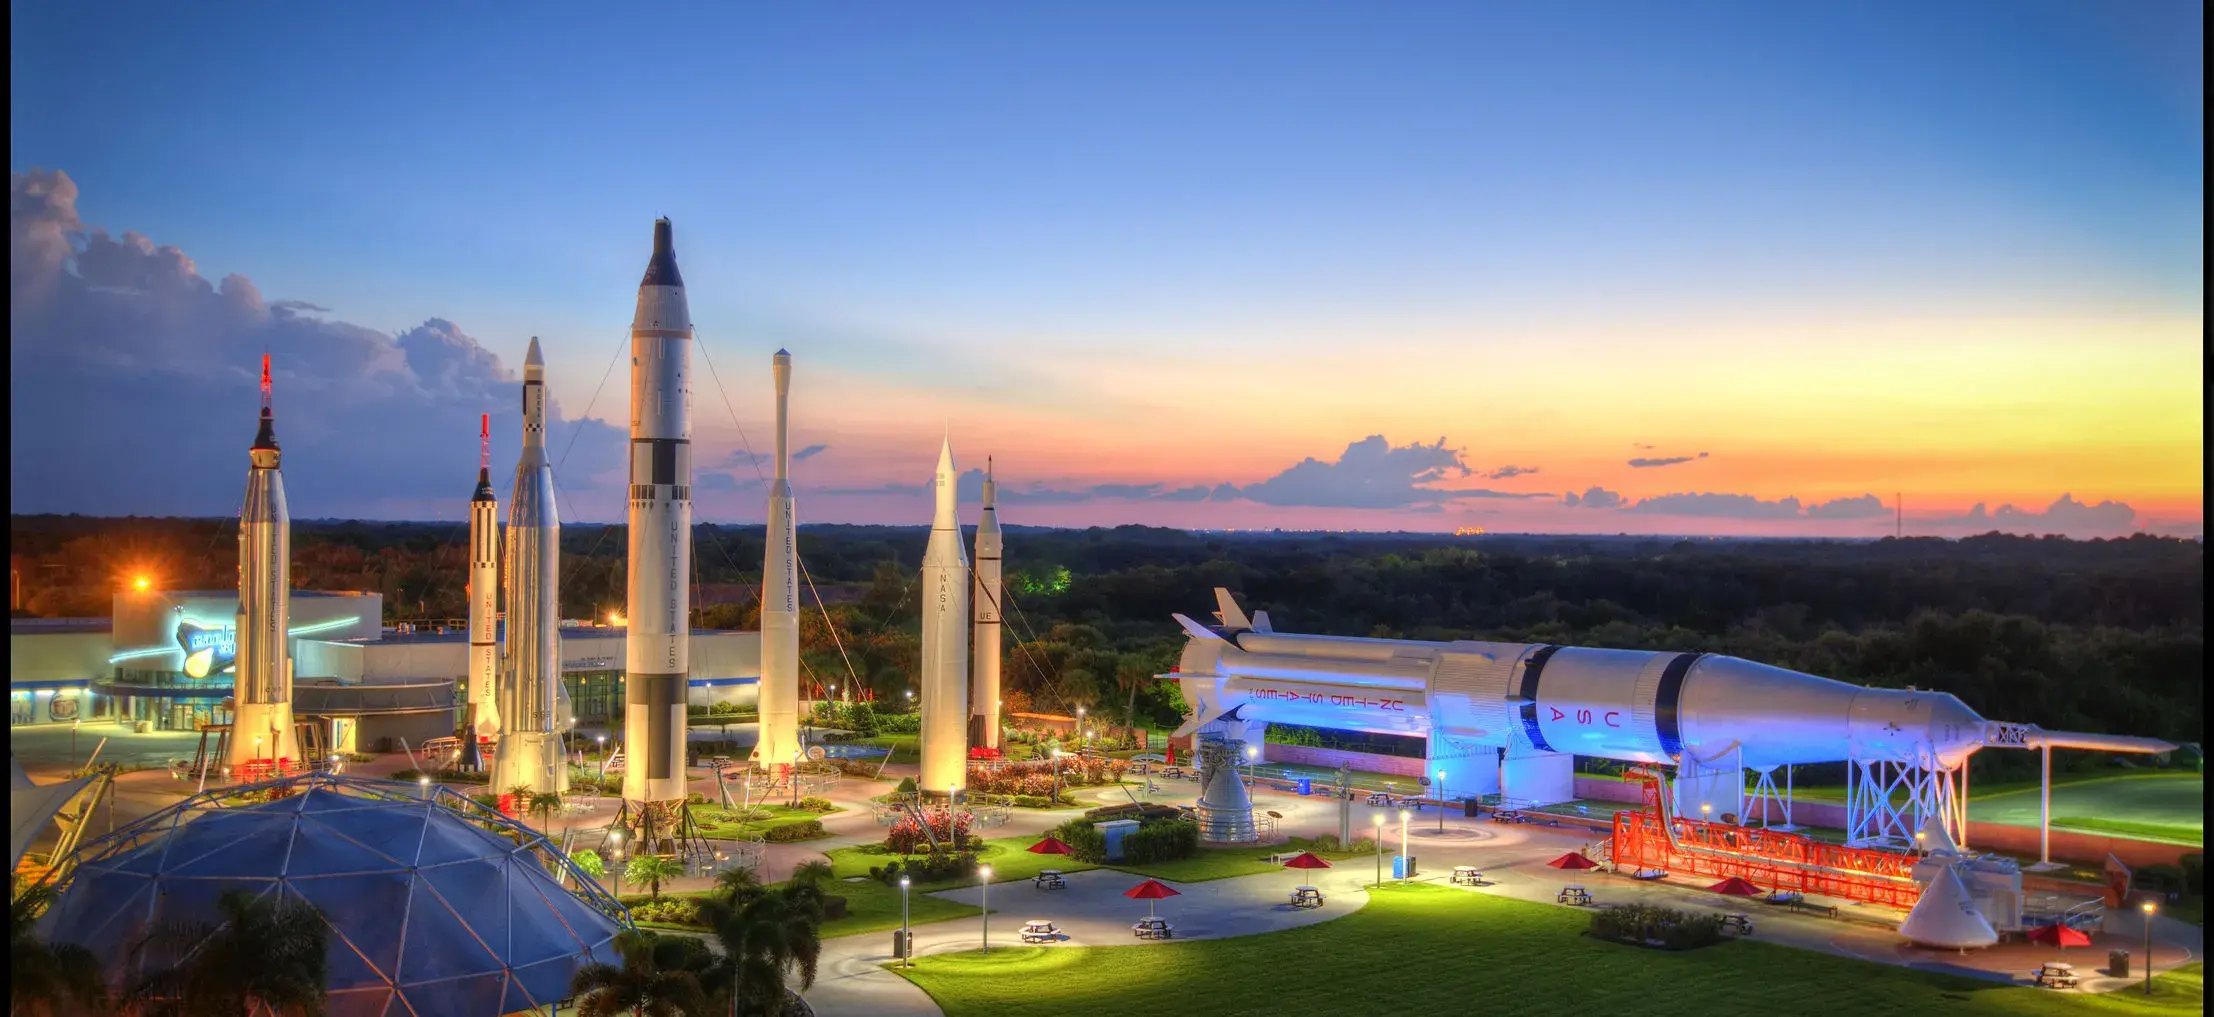 Aerial view of the rocket garden at Kennedy Space Center